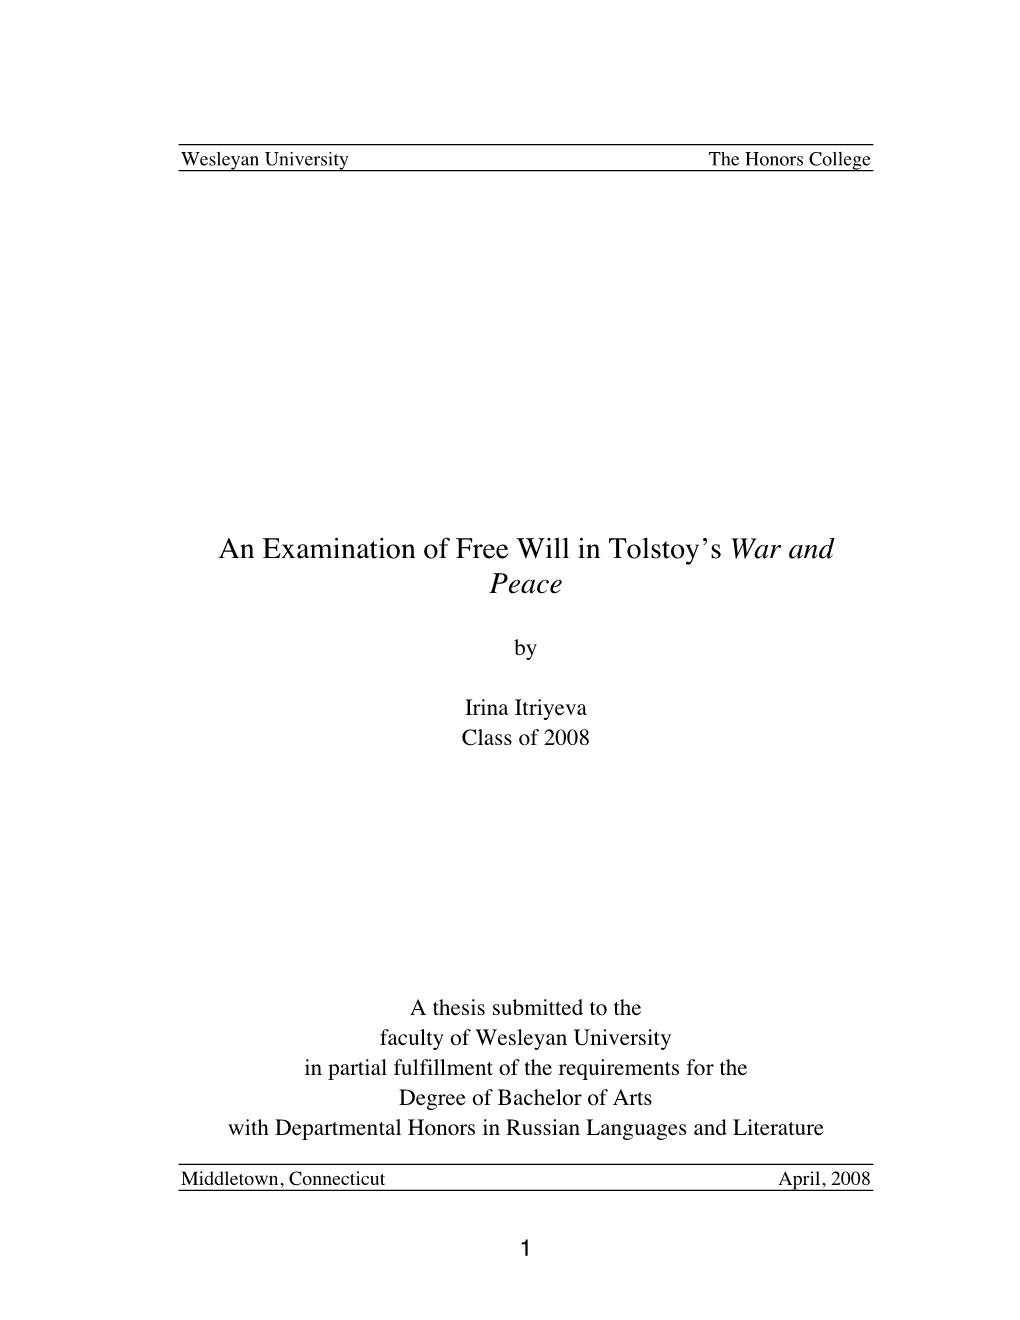 An Examination of Free Will in Tolstoy's